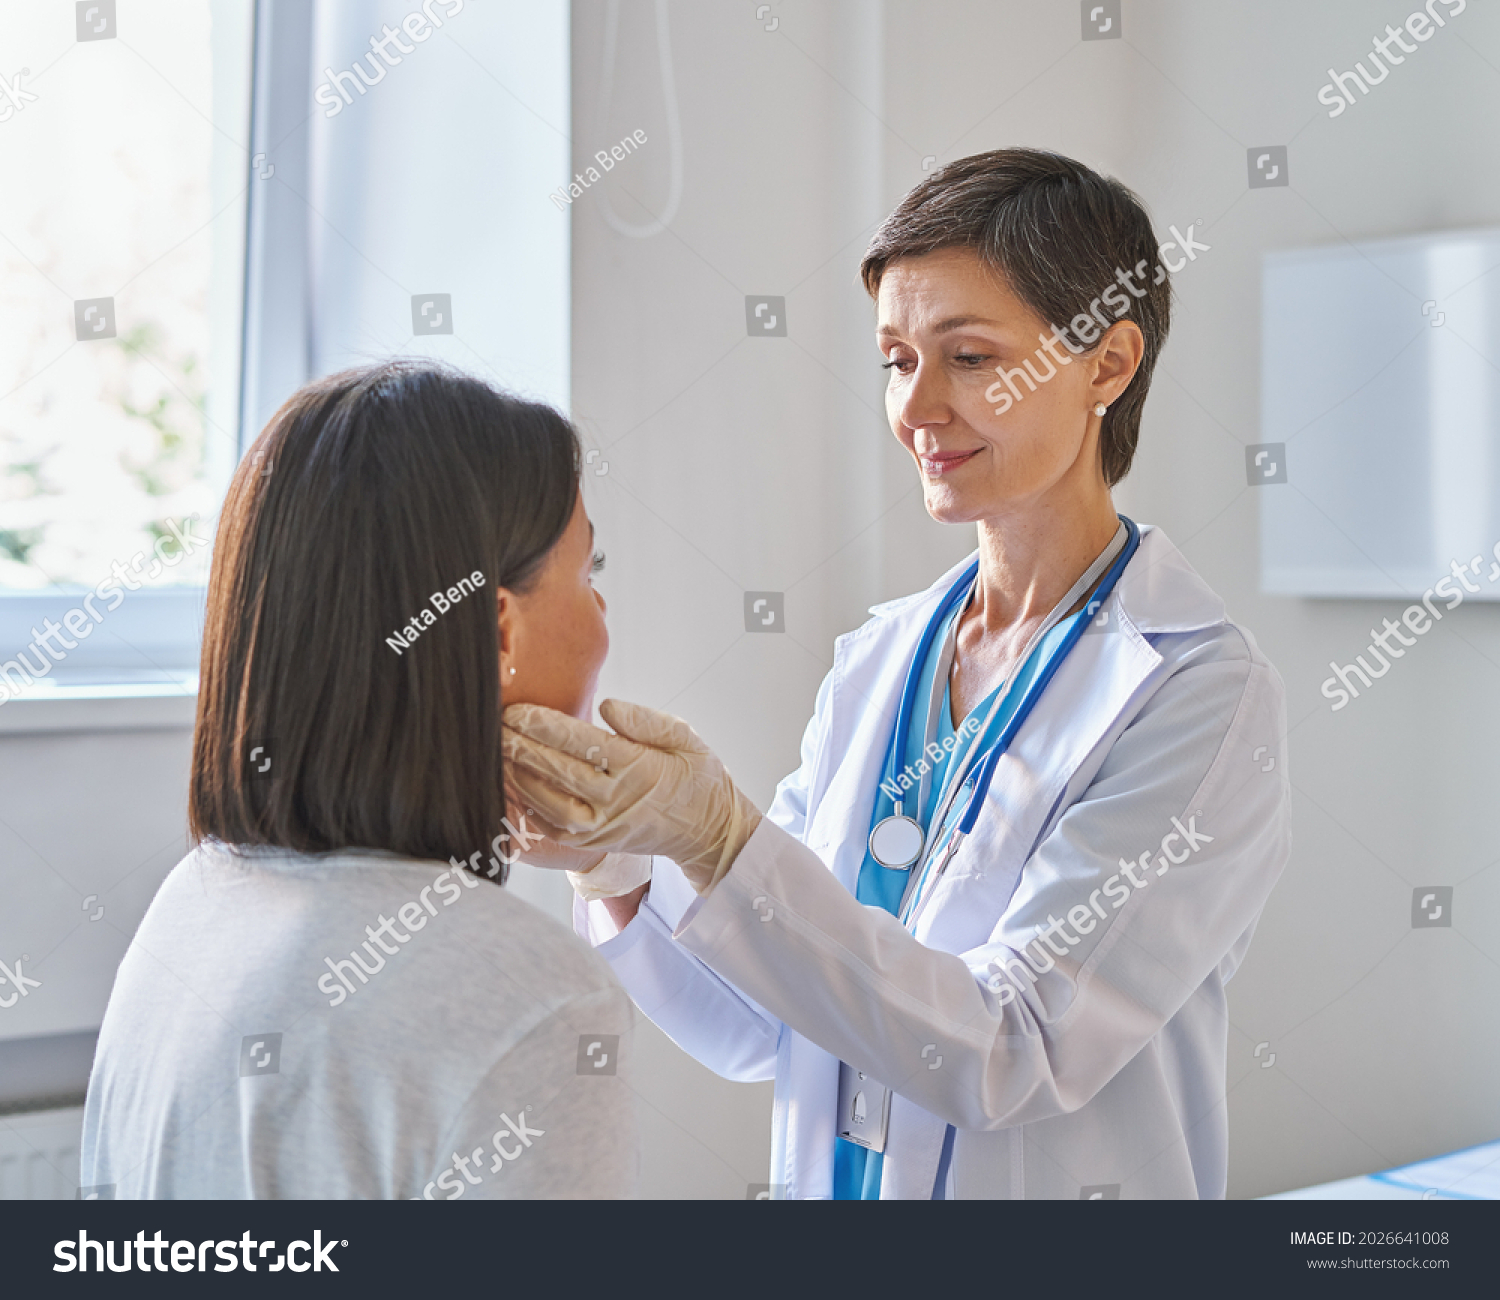 Friendly middle-aged woman doctor wearing gloves checking sore throat or thyroid glands, touching neck of young African female patient visiting clinic office. Thyroid cancer prevention concept #2026641008